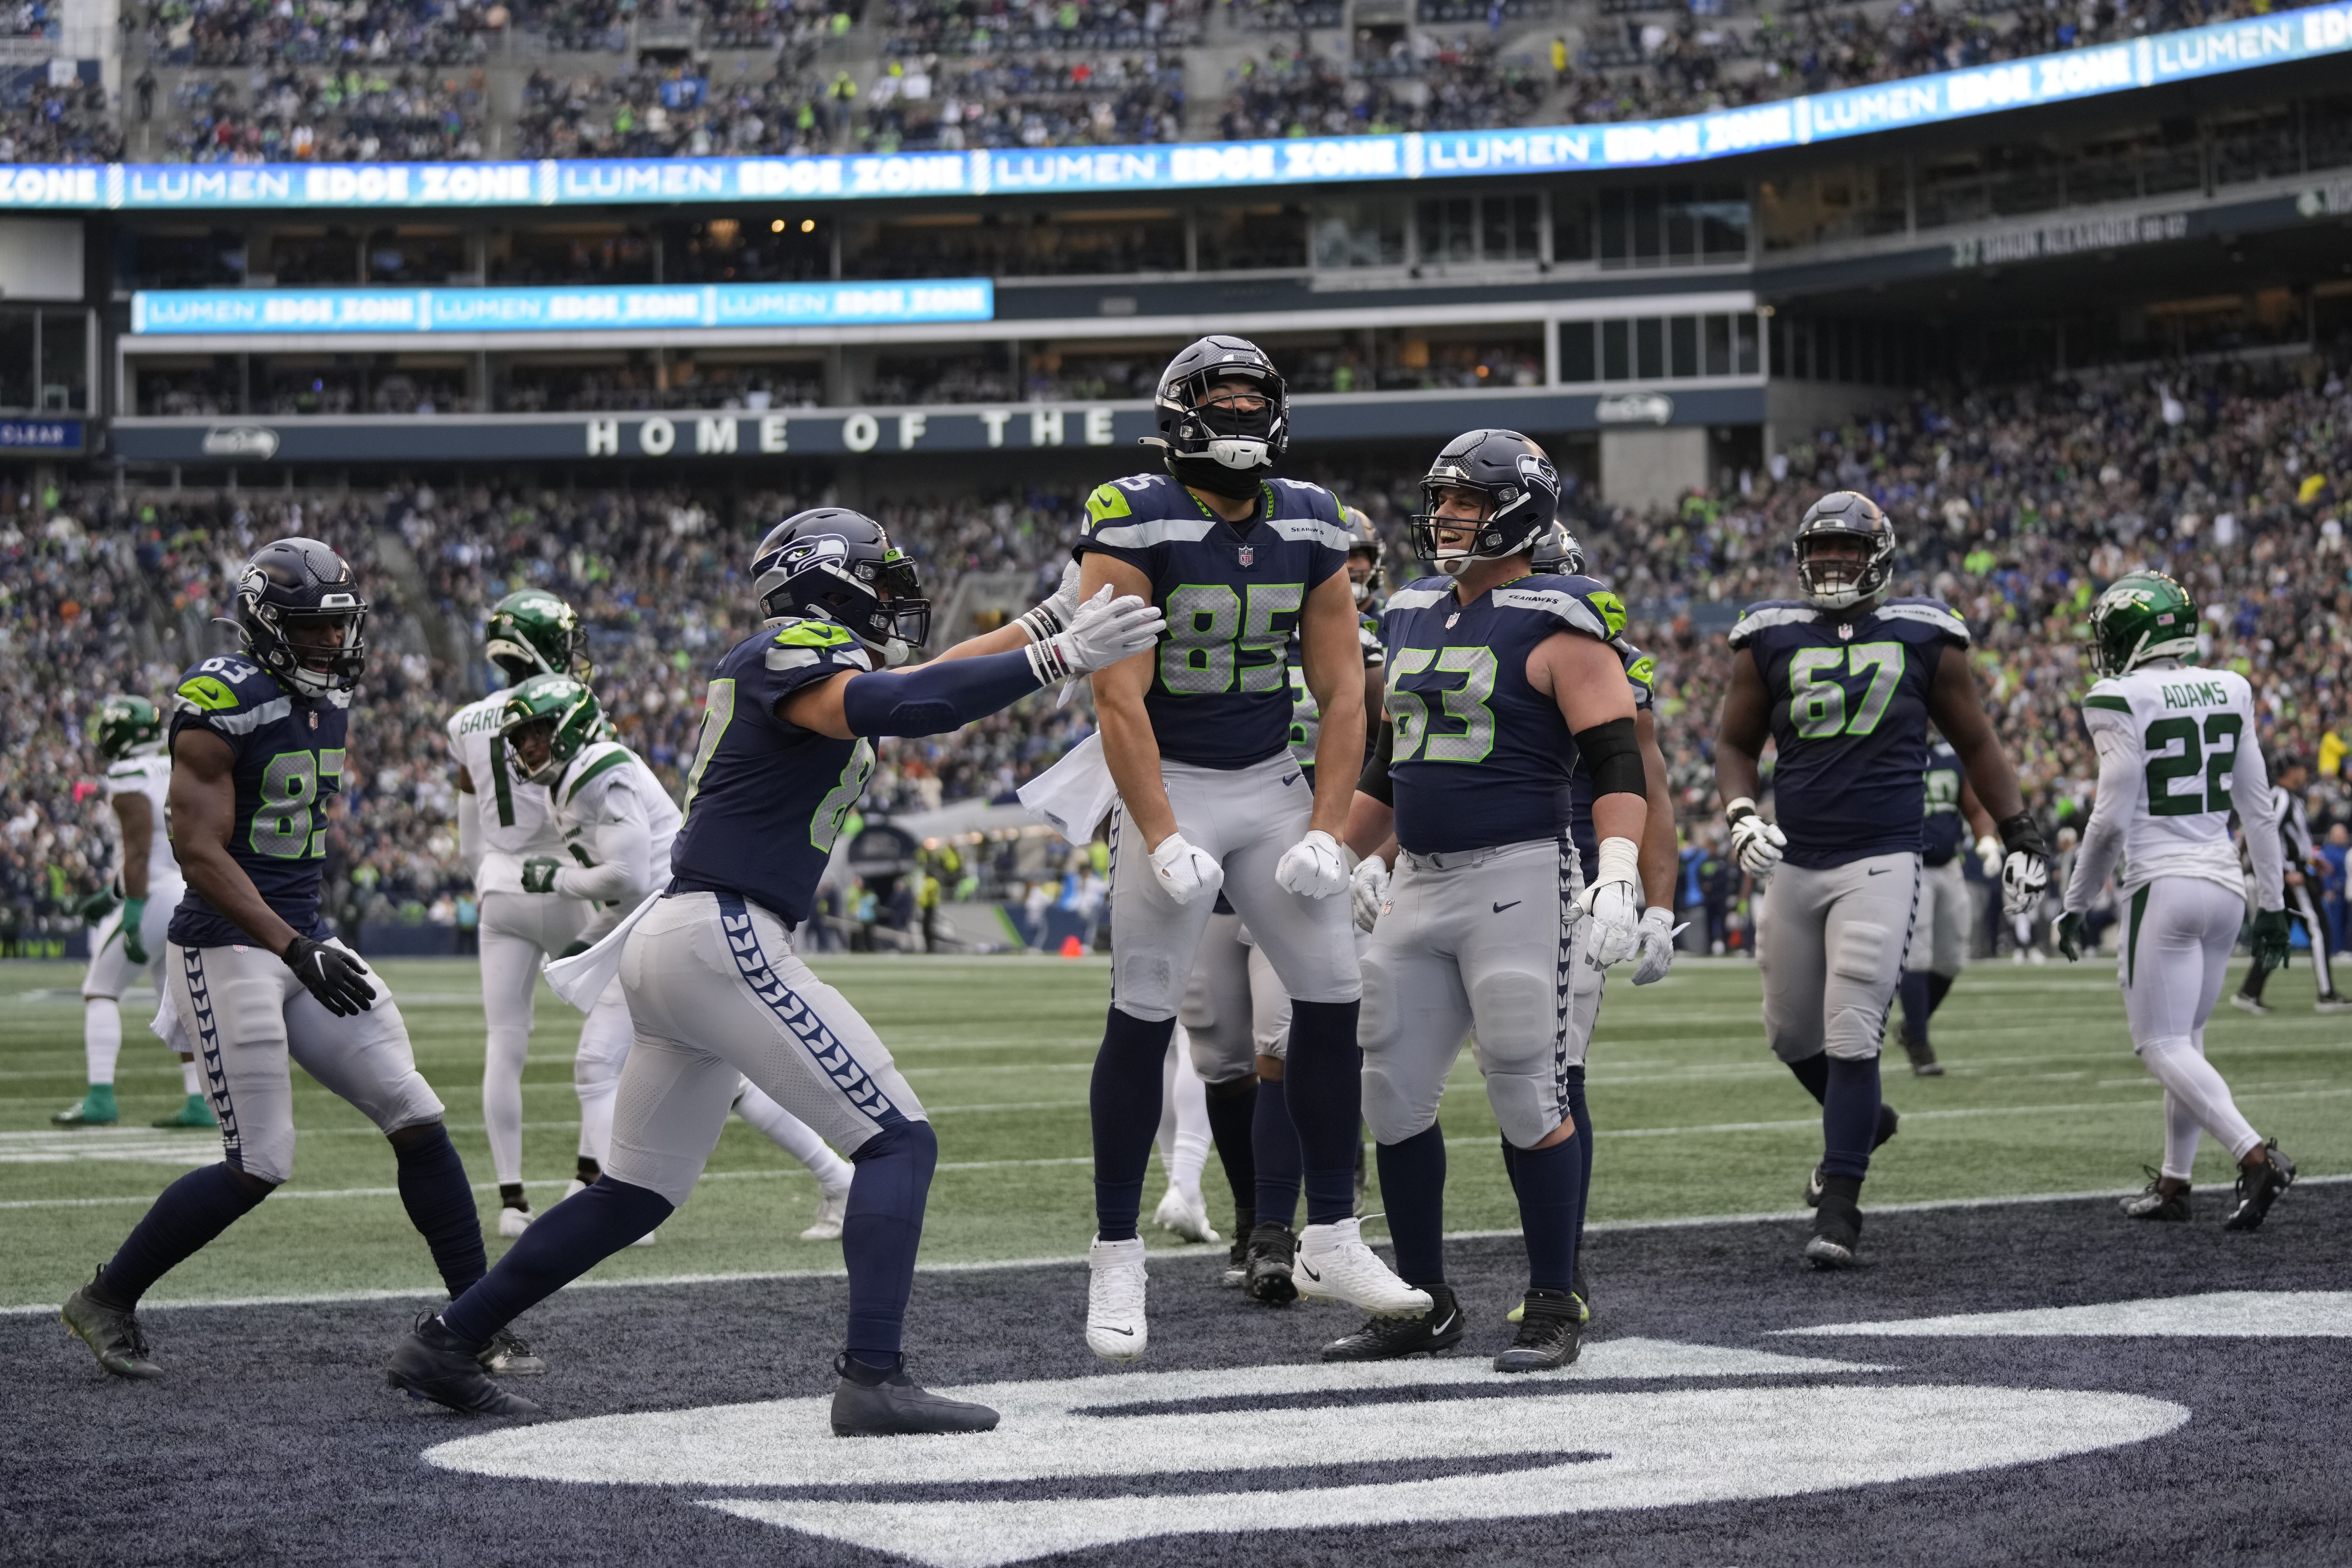 <p><em><strong>Jets 6</strong></em><br />
<em><strong>Seahawks 23</strong></em></p>
<p>Seattle picked up the last NFC wild card spot Washington fumbled away, while the Jets got all the way to Week 17 before extending their NFL-worst postseason drought to 12 straight seasons. Just like we said before the season, right?</p>
